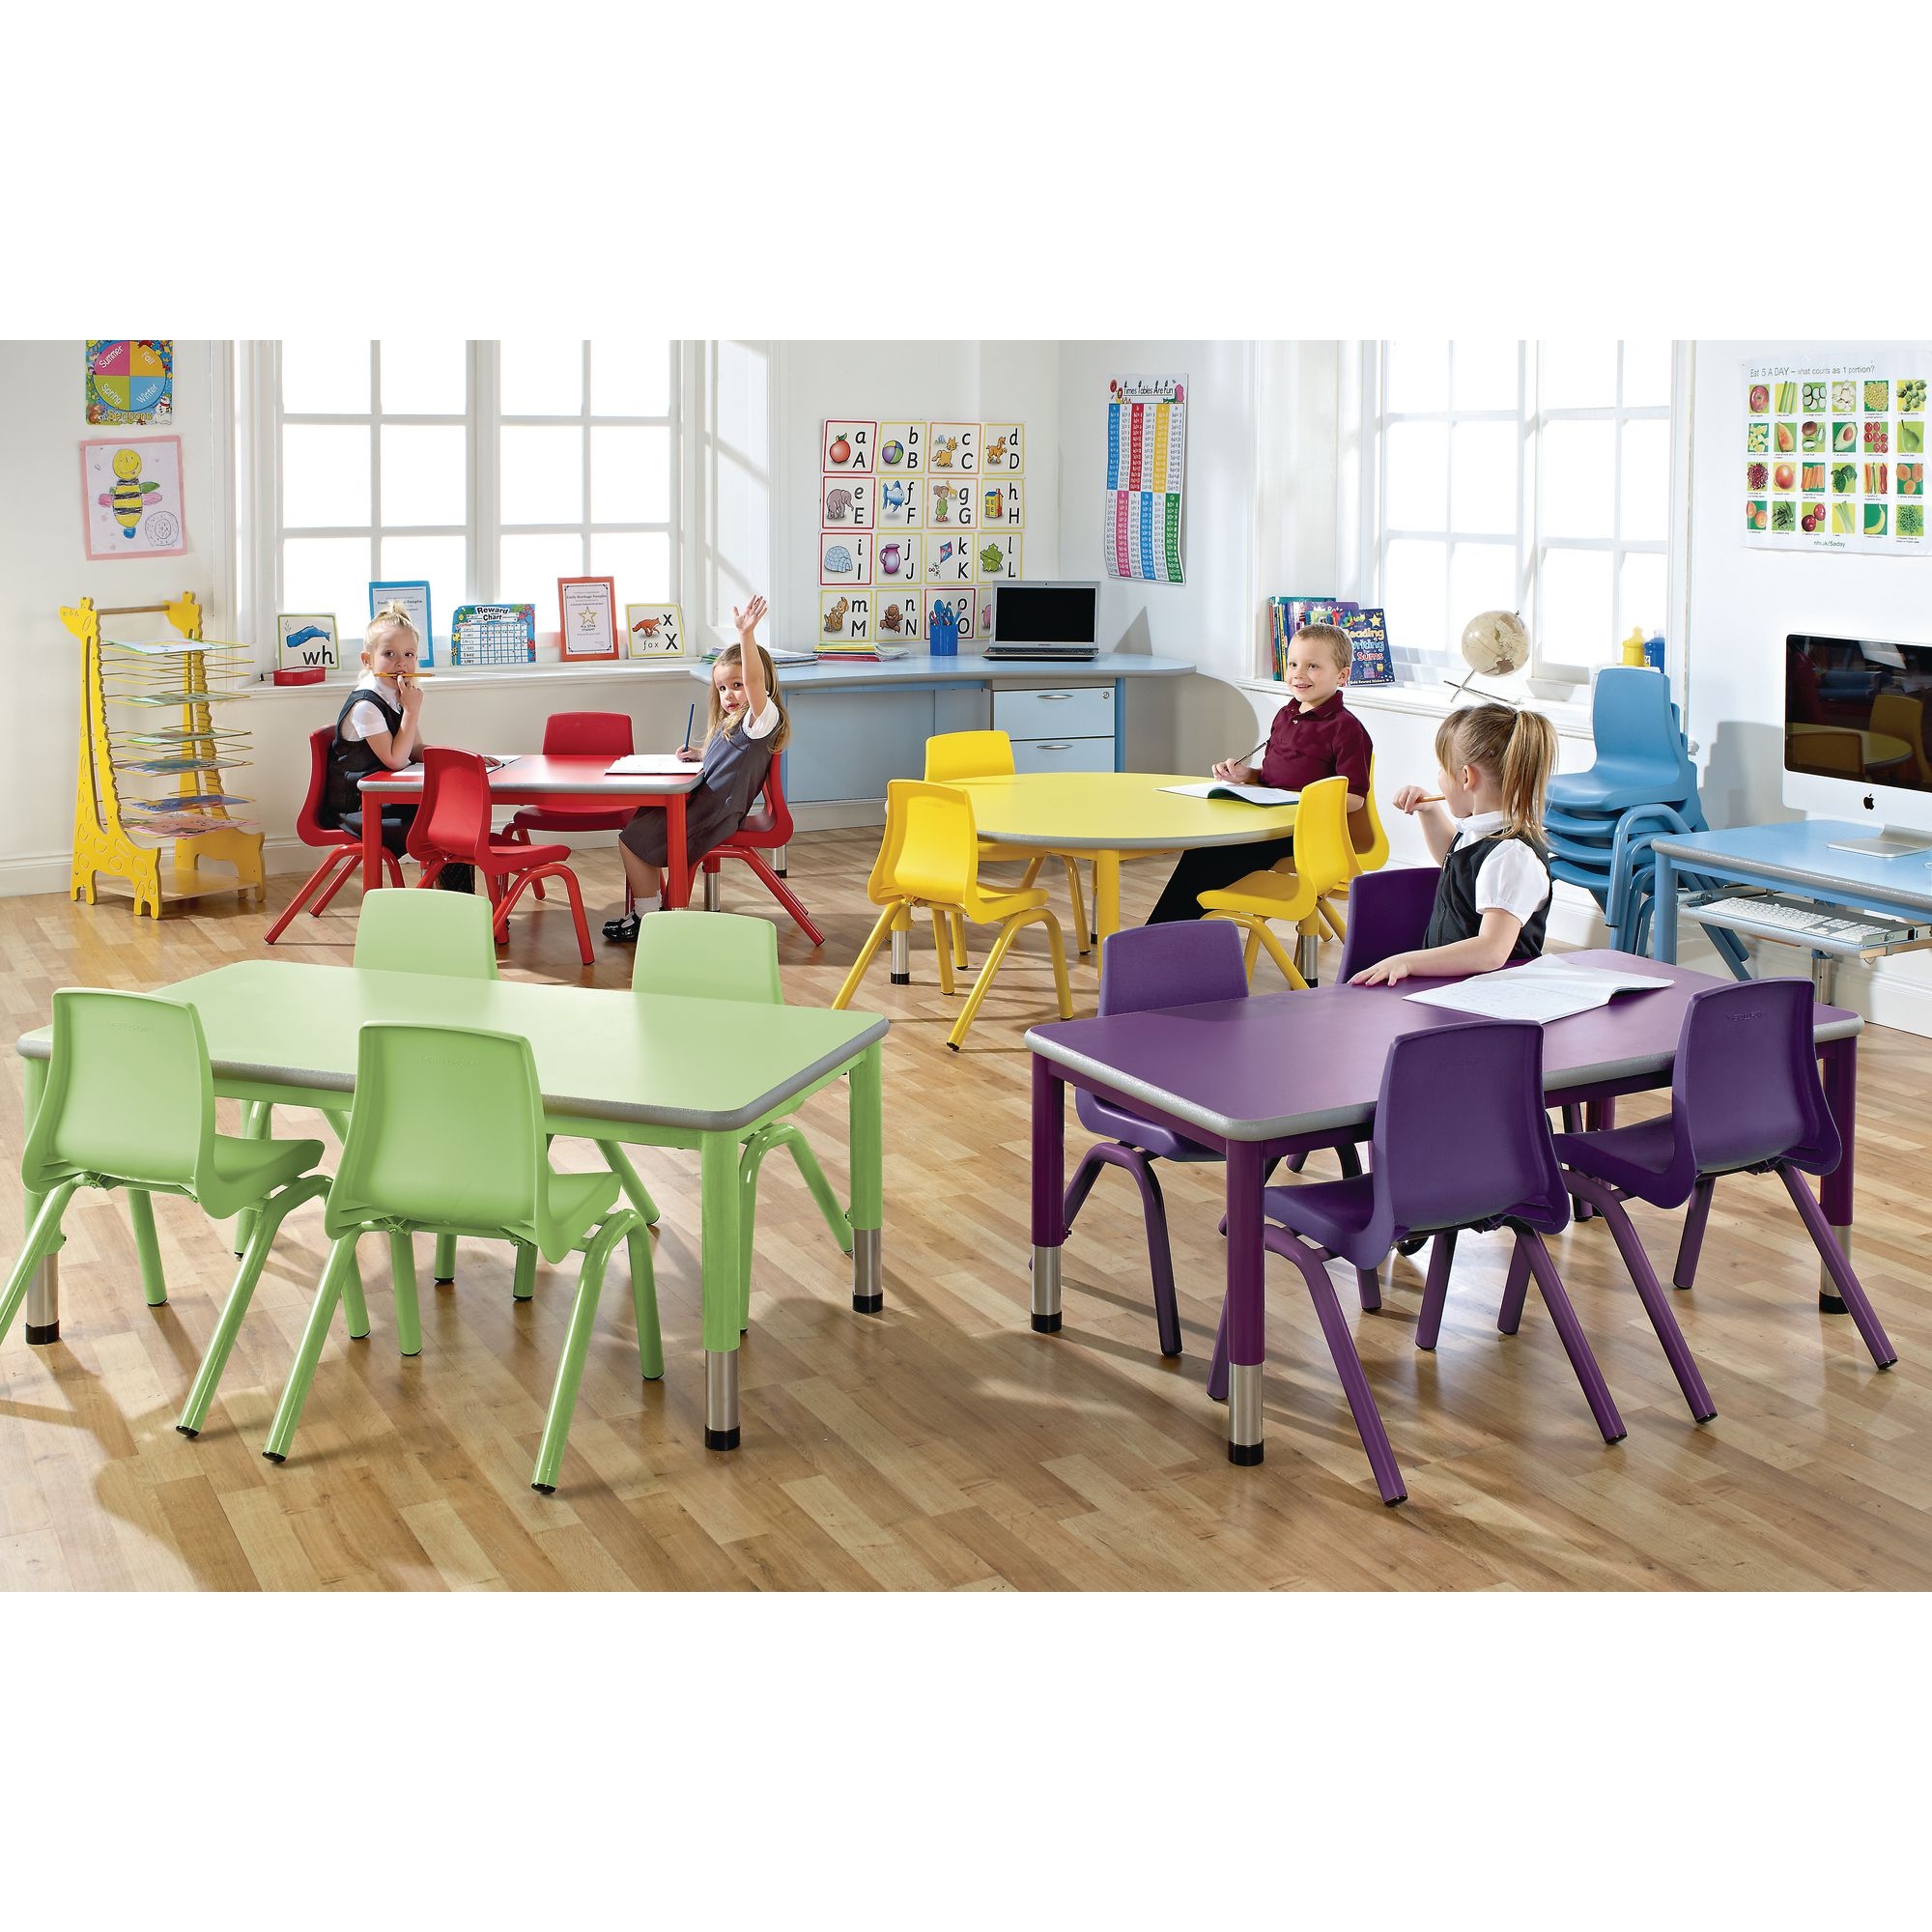 Harlequin Rectangular Height Adjustable Steel Classroom Pack: Table and 4 Chairs - 900 x 600 x 400mm - Red